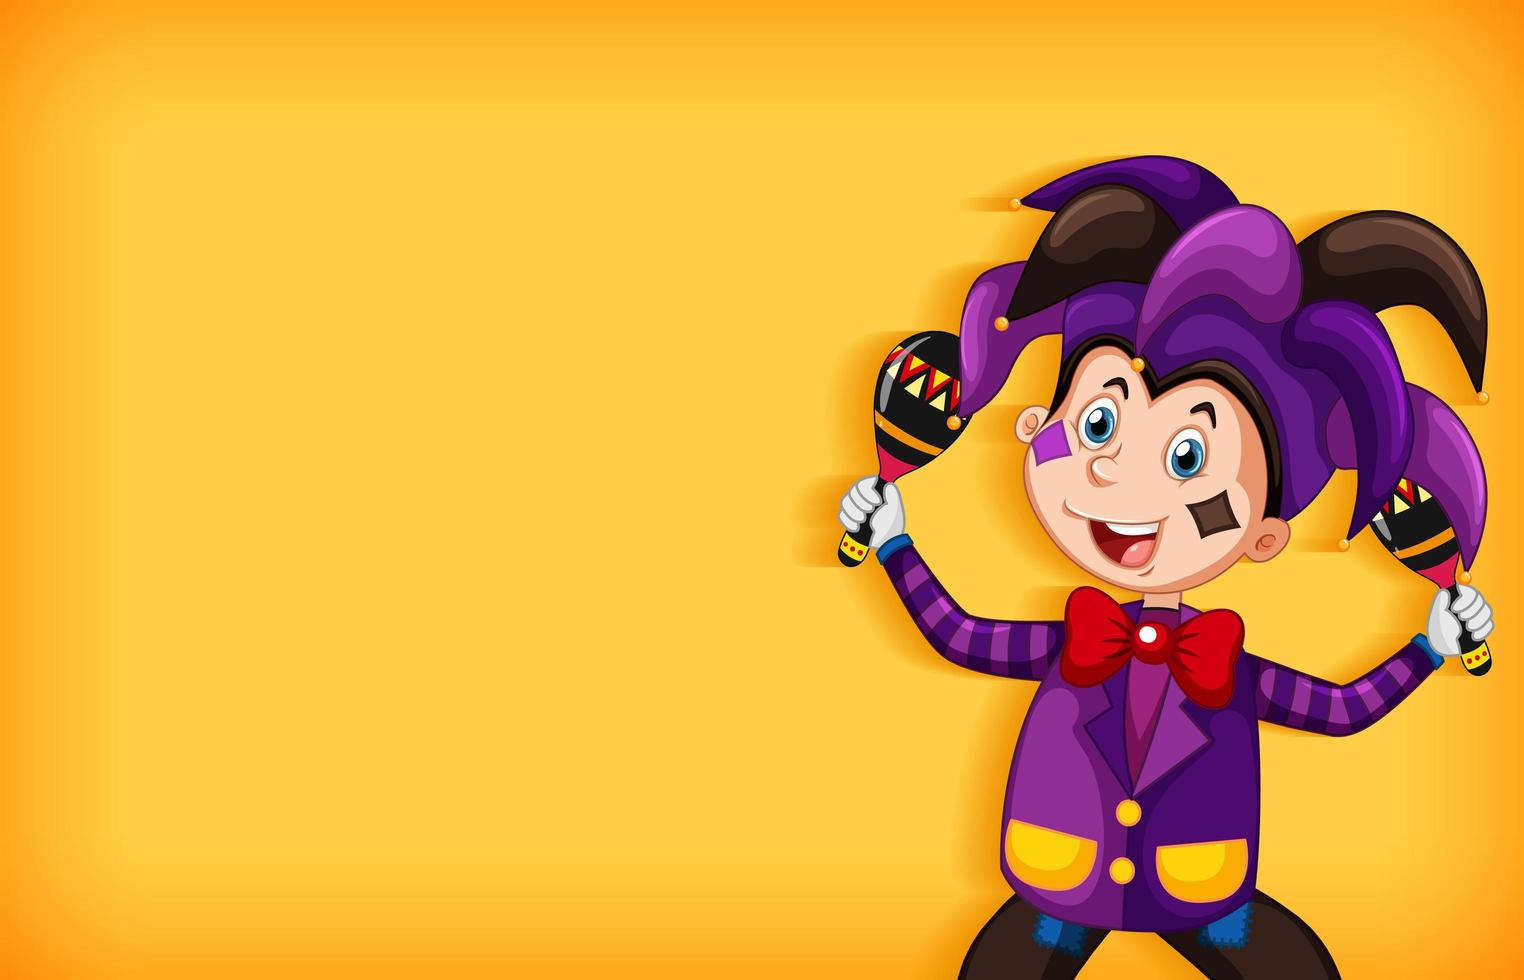 Background template design with happy clown in purple costume vector